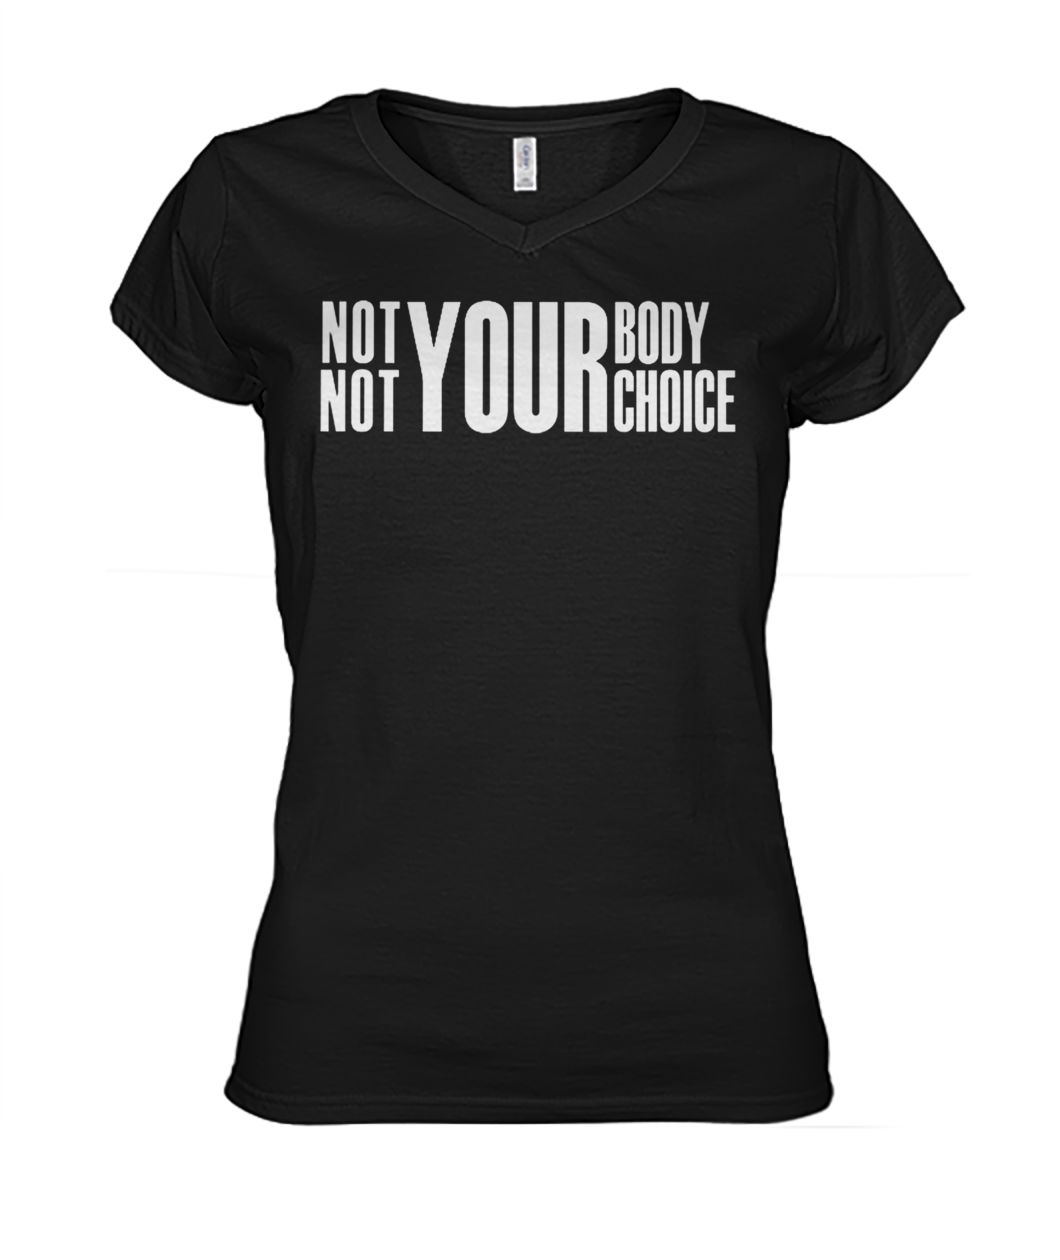 Not your body not your choice women's v-neck